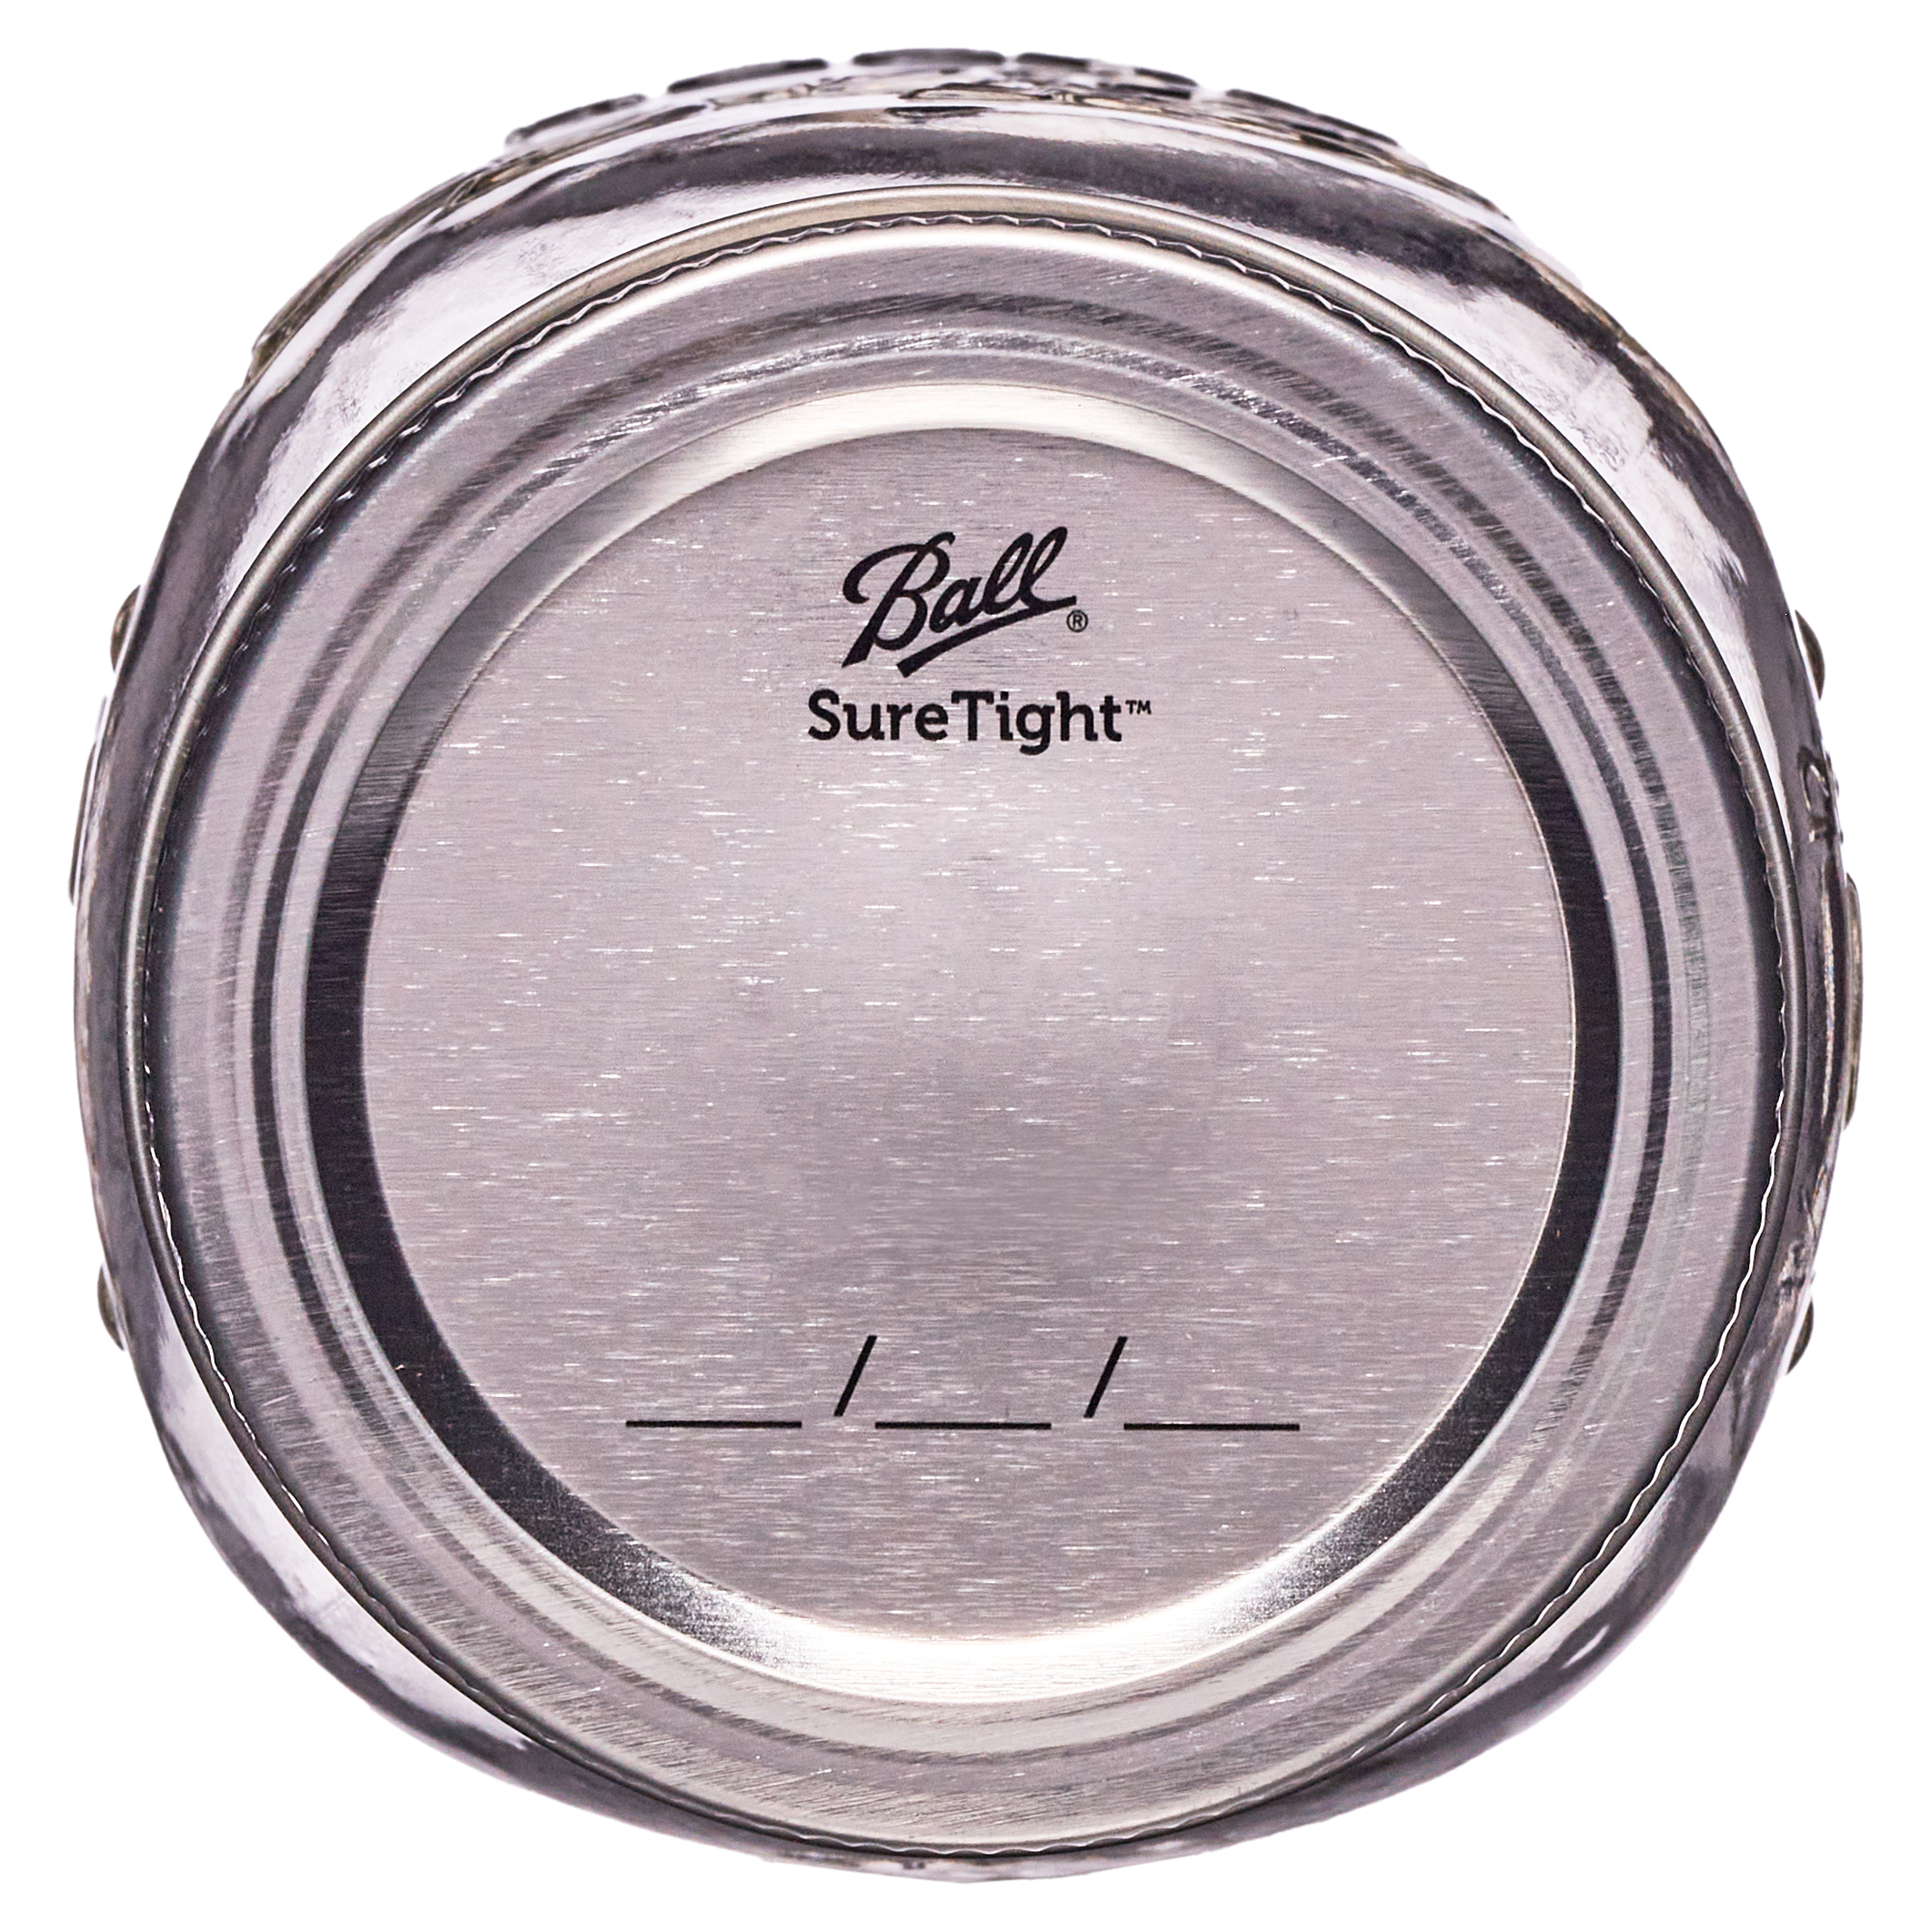 Ball Regular Mouth 16oz Pint Mason Jars with Lids & Bands, 12 Count - image 4 of 8